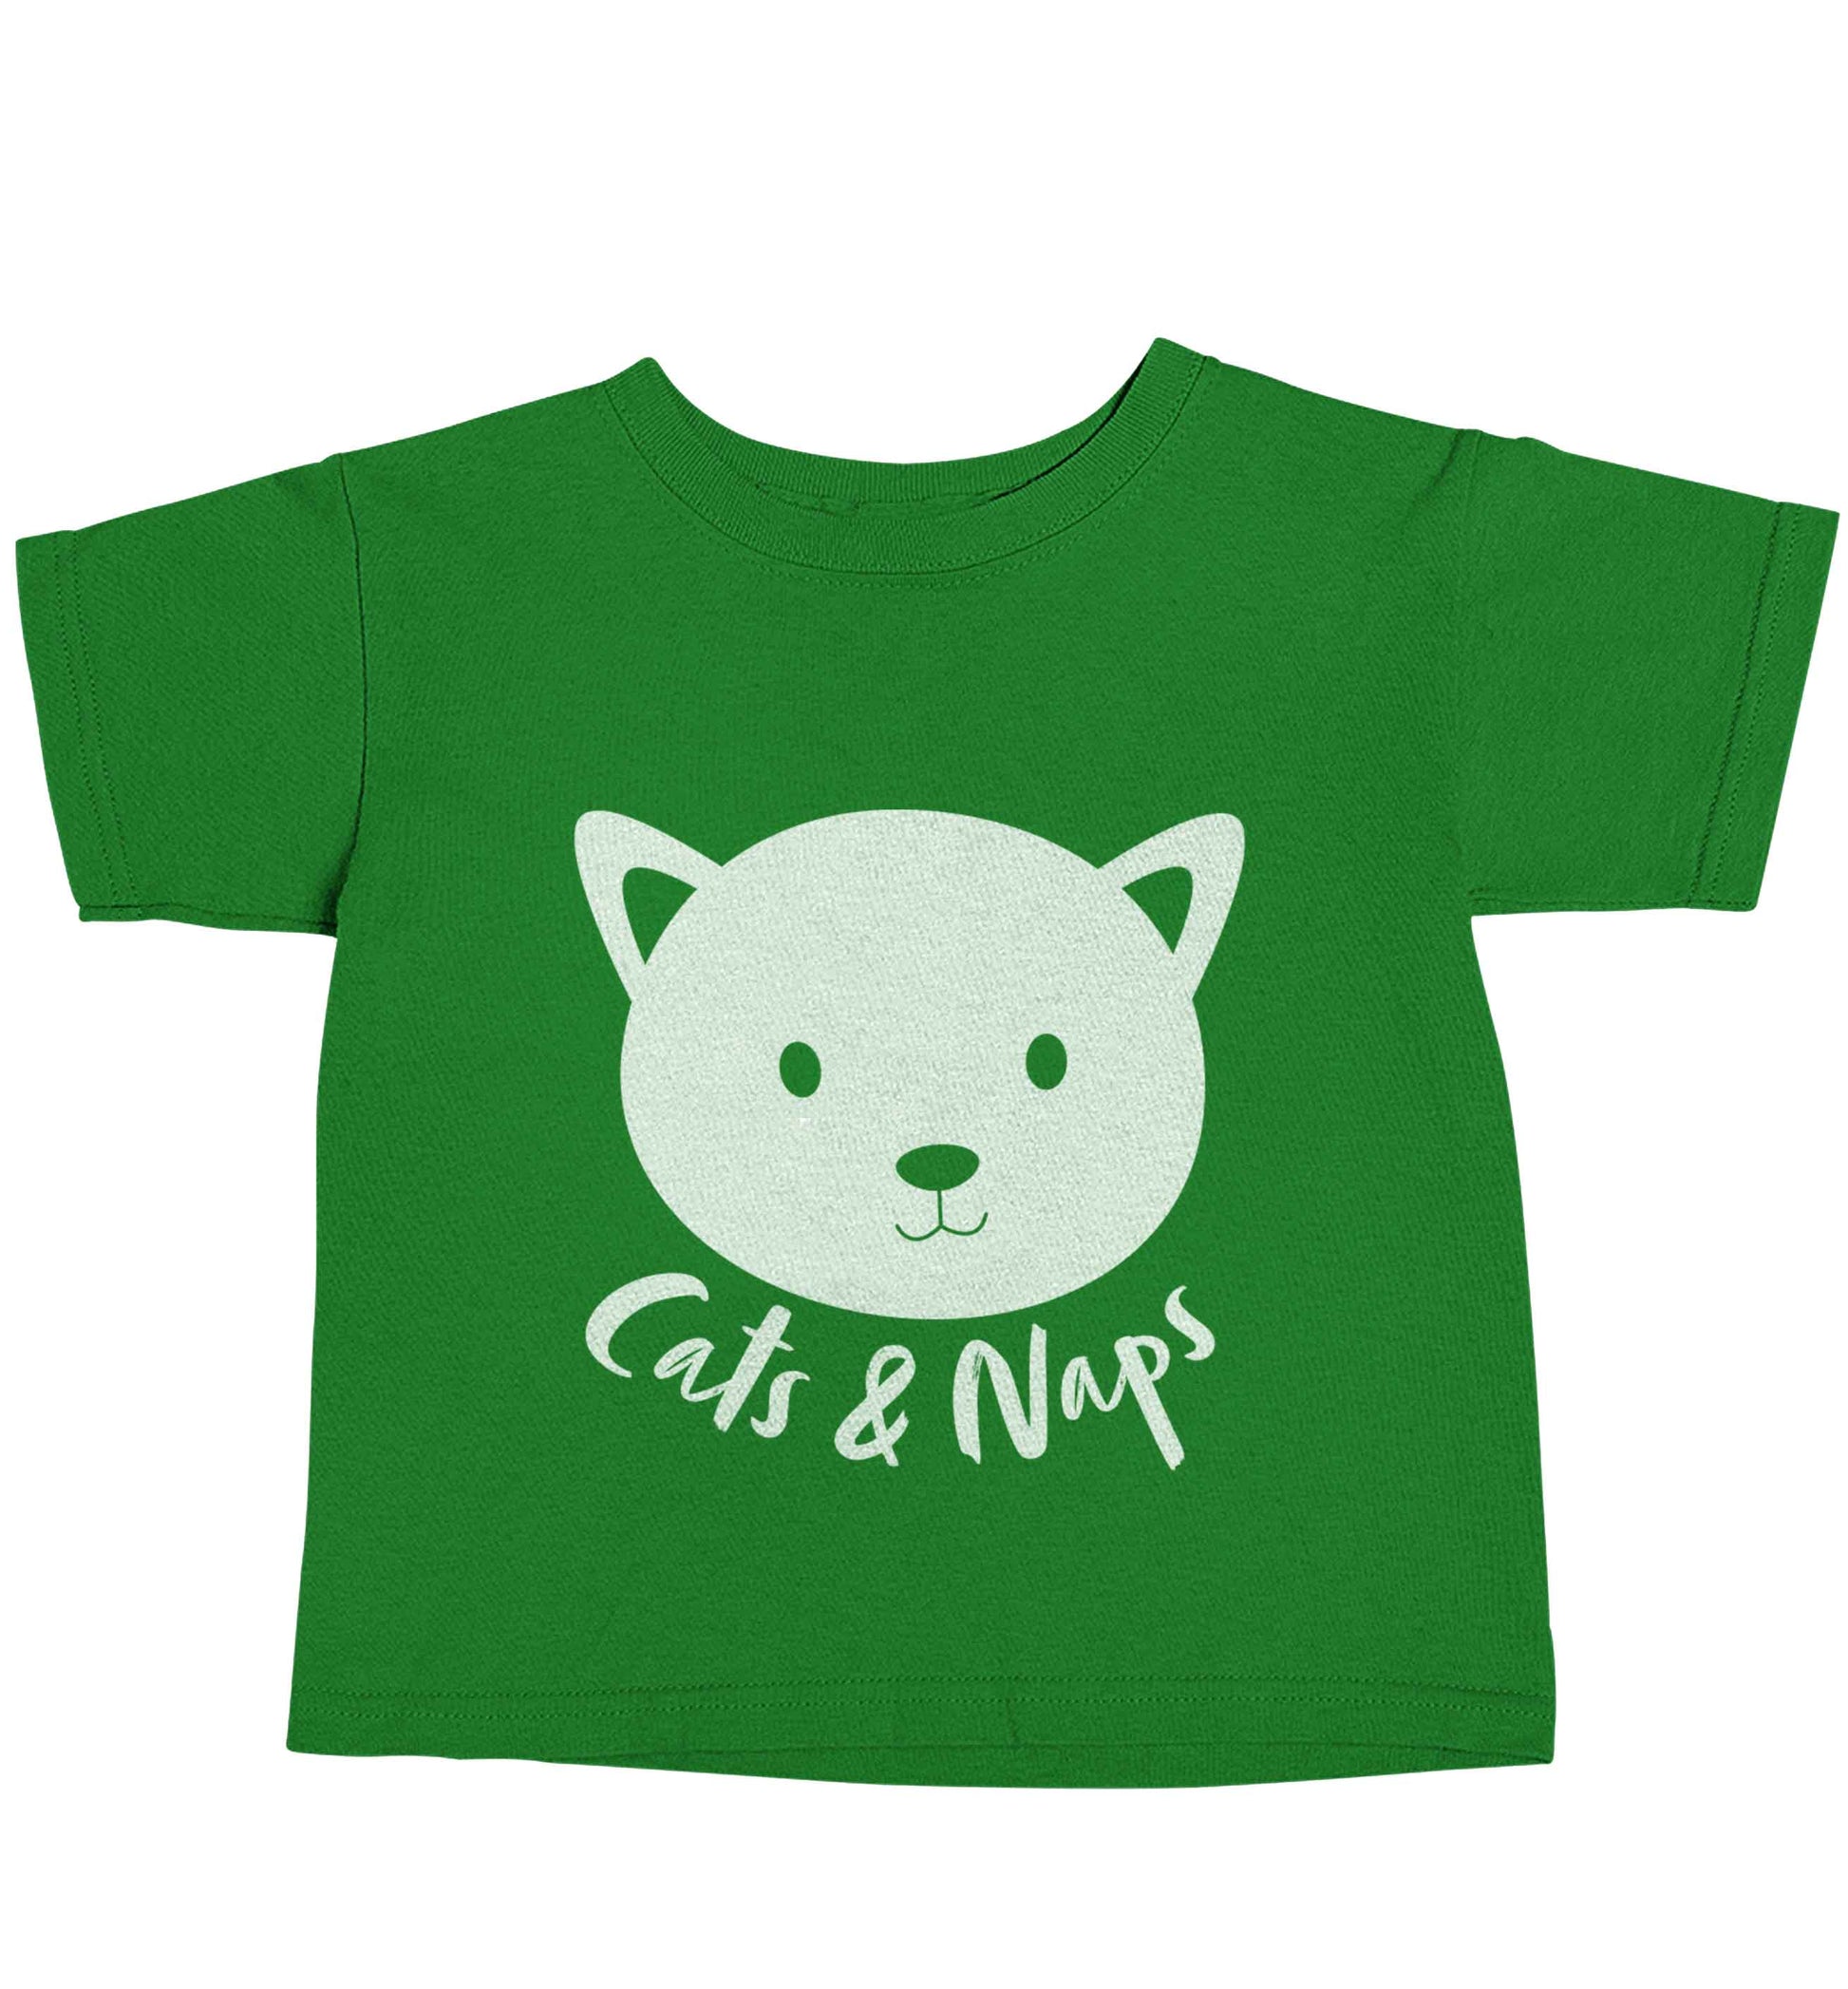 Cats and naps Kit green baby toddler Tshirt 2 Years